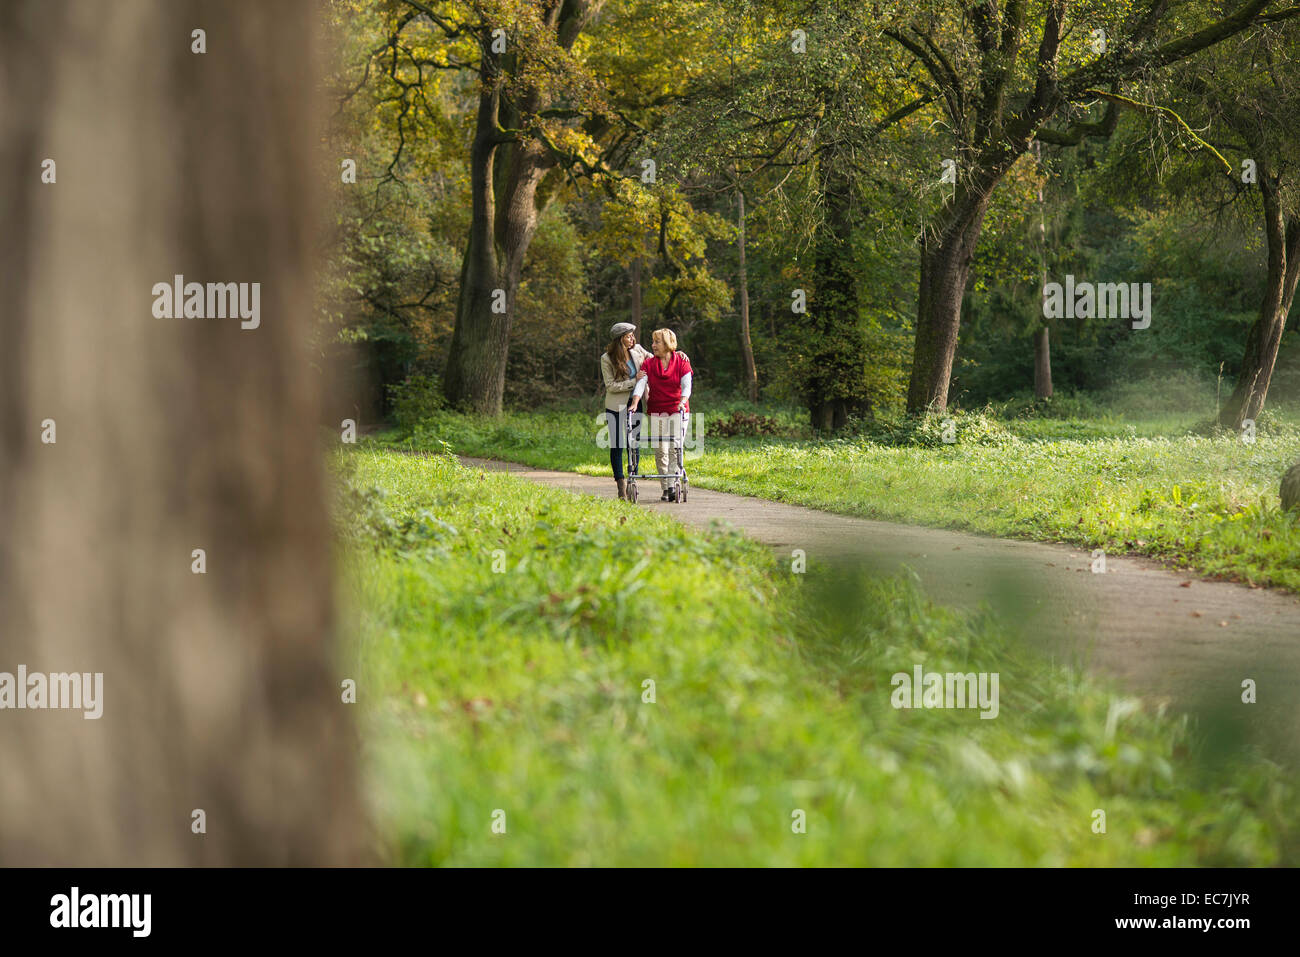 Senior woman and granddaughter walking together in a park Stock Photo